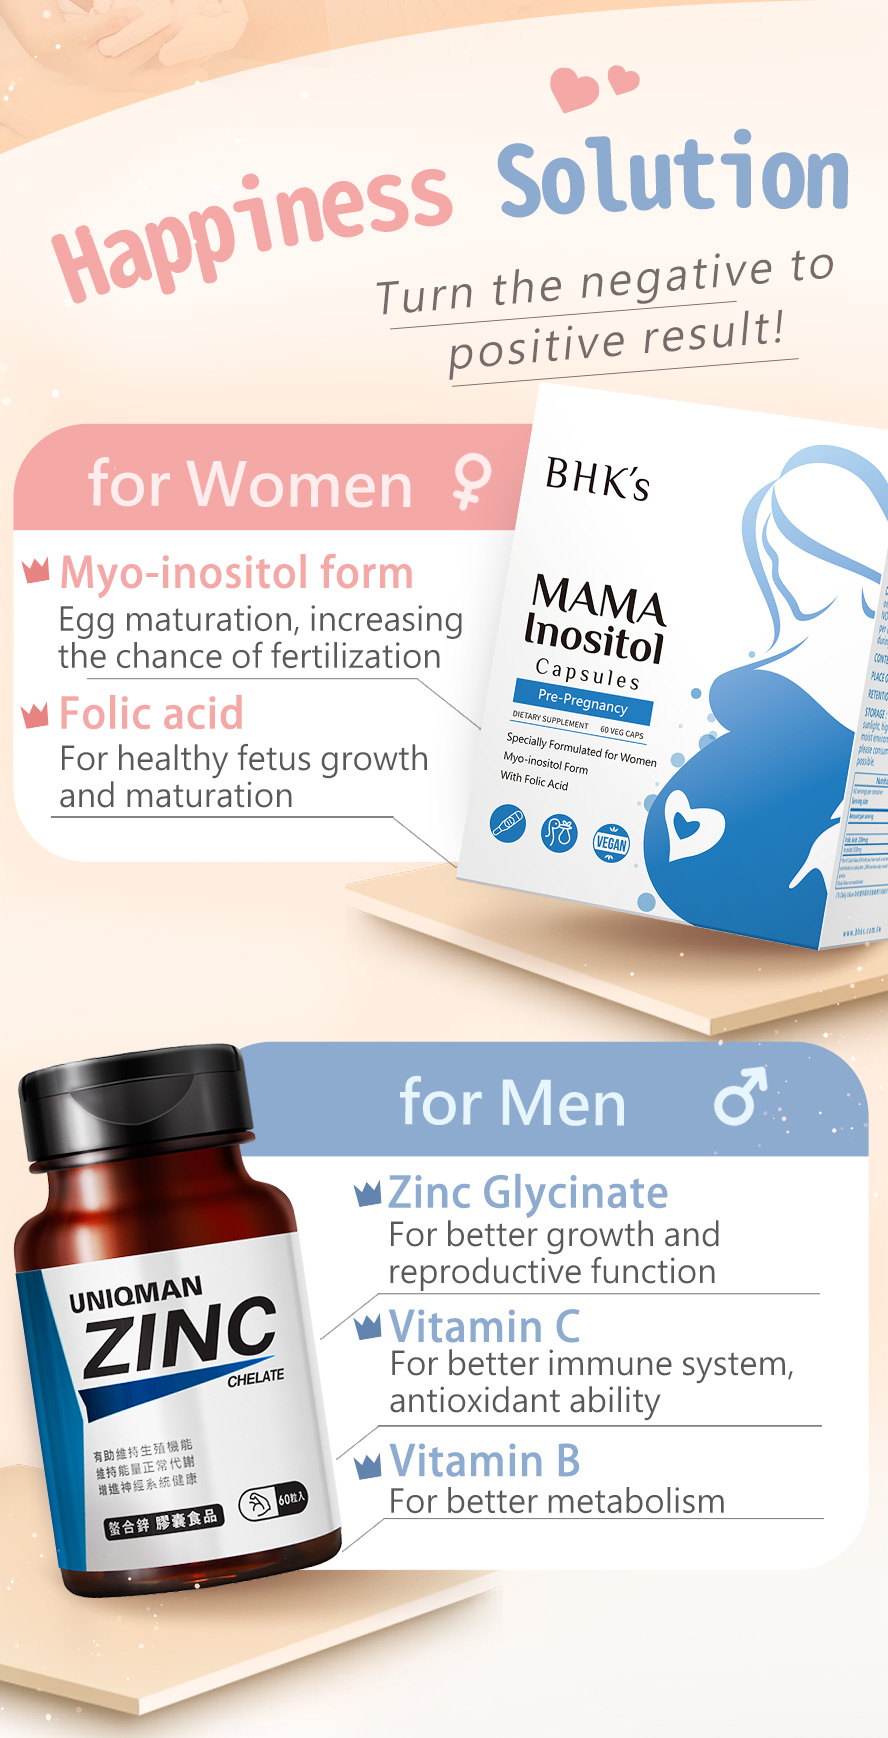 BHKs Inositol improves the function of the ovaries and fertility in women. Chelated Zinc increases semen quality in men.